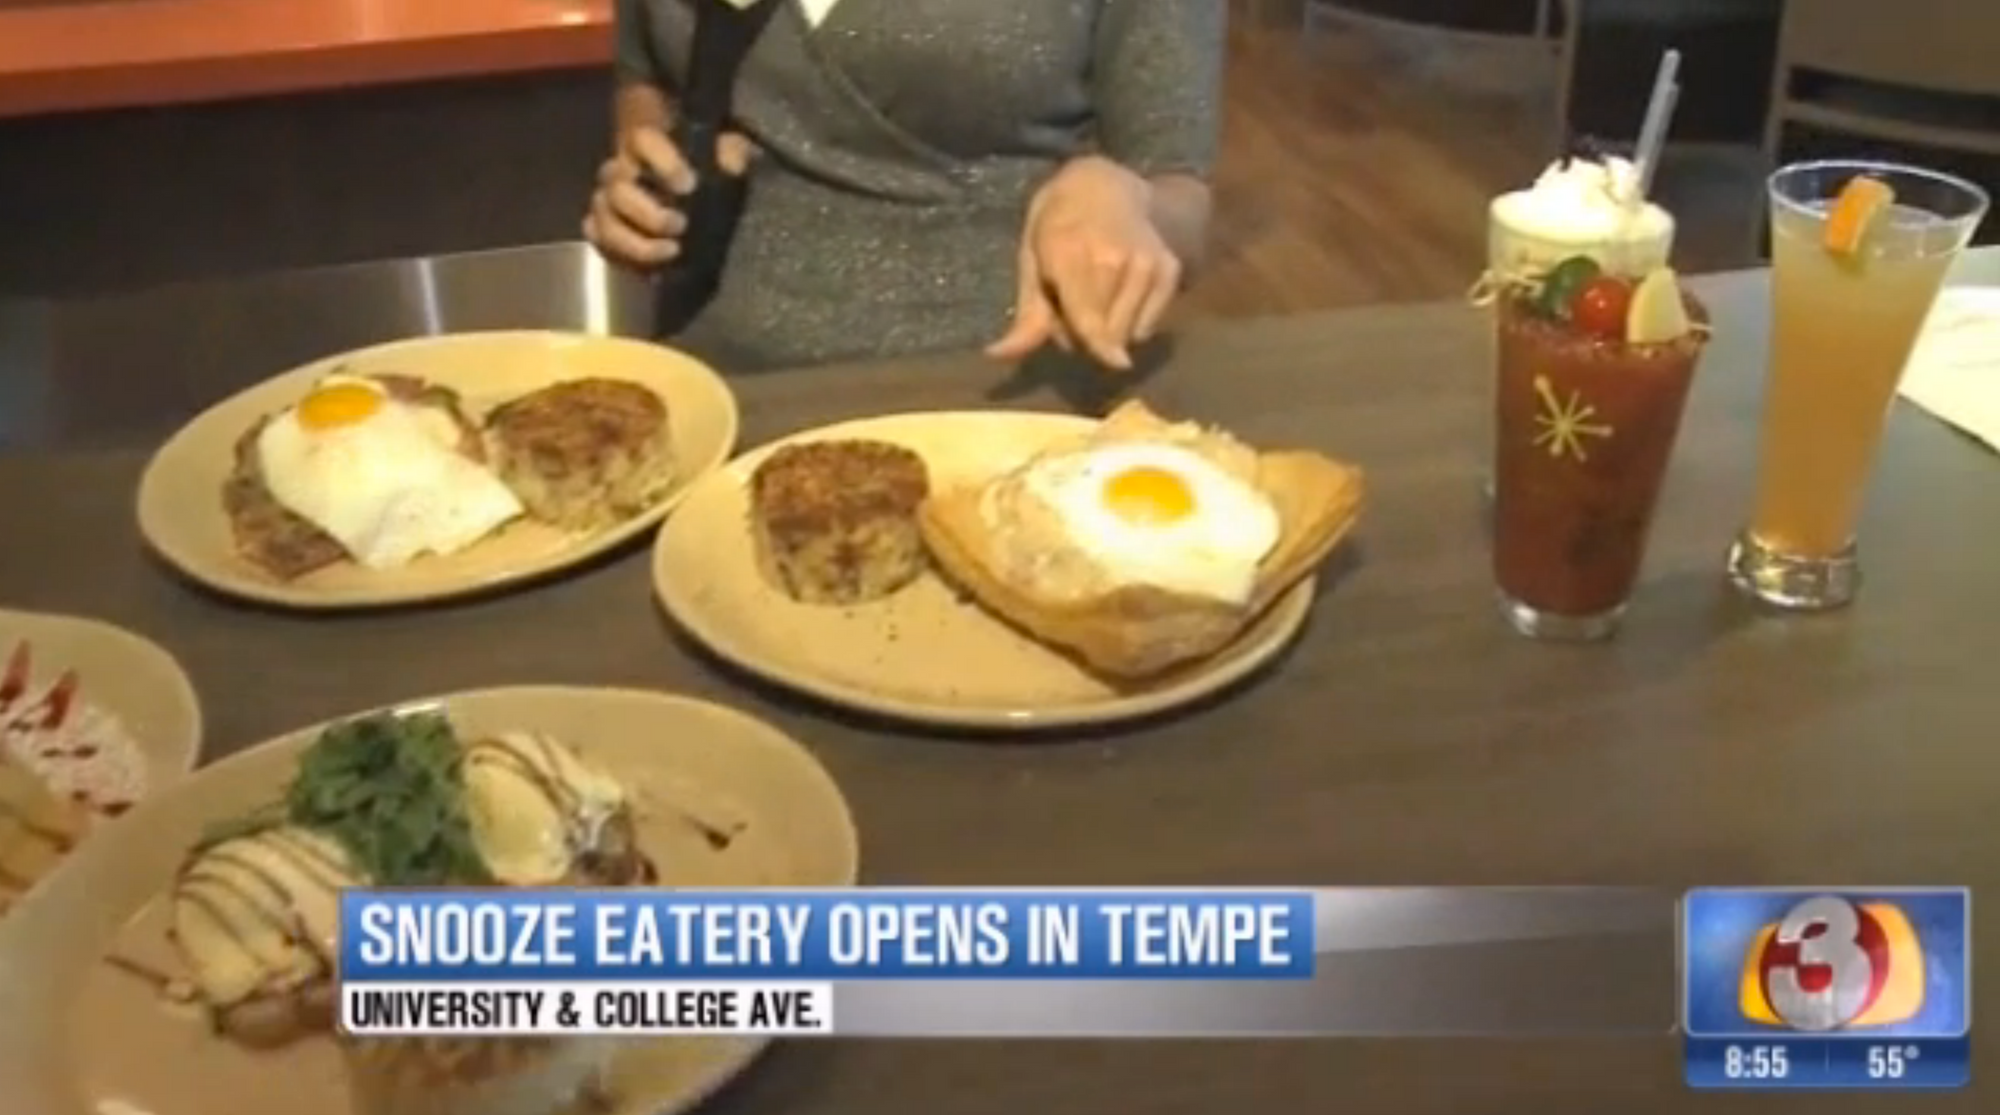 Start off your day at Tempe's new Snooze Eatery